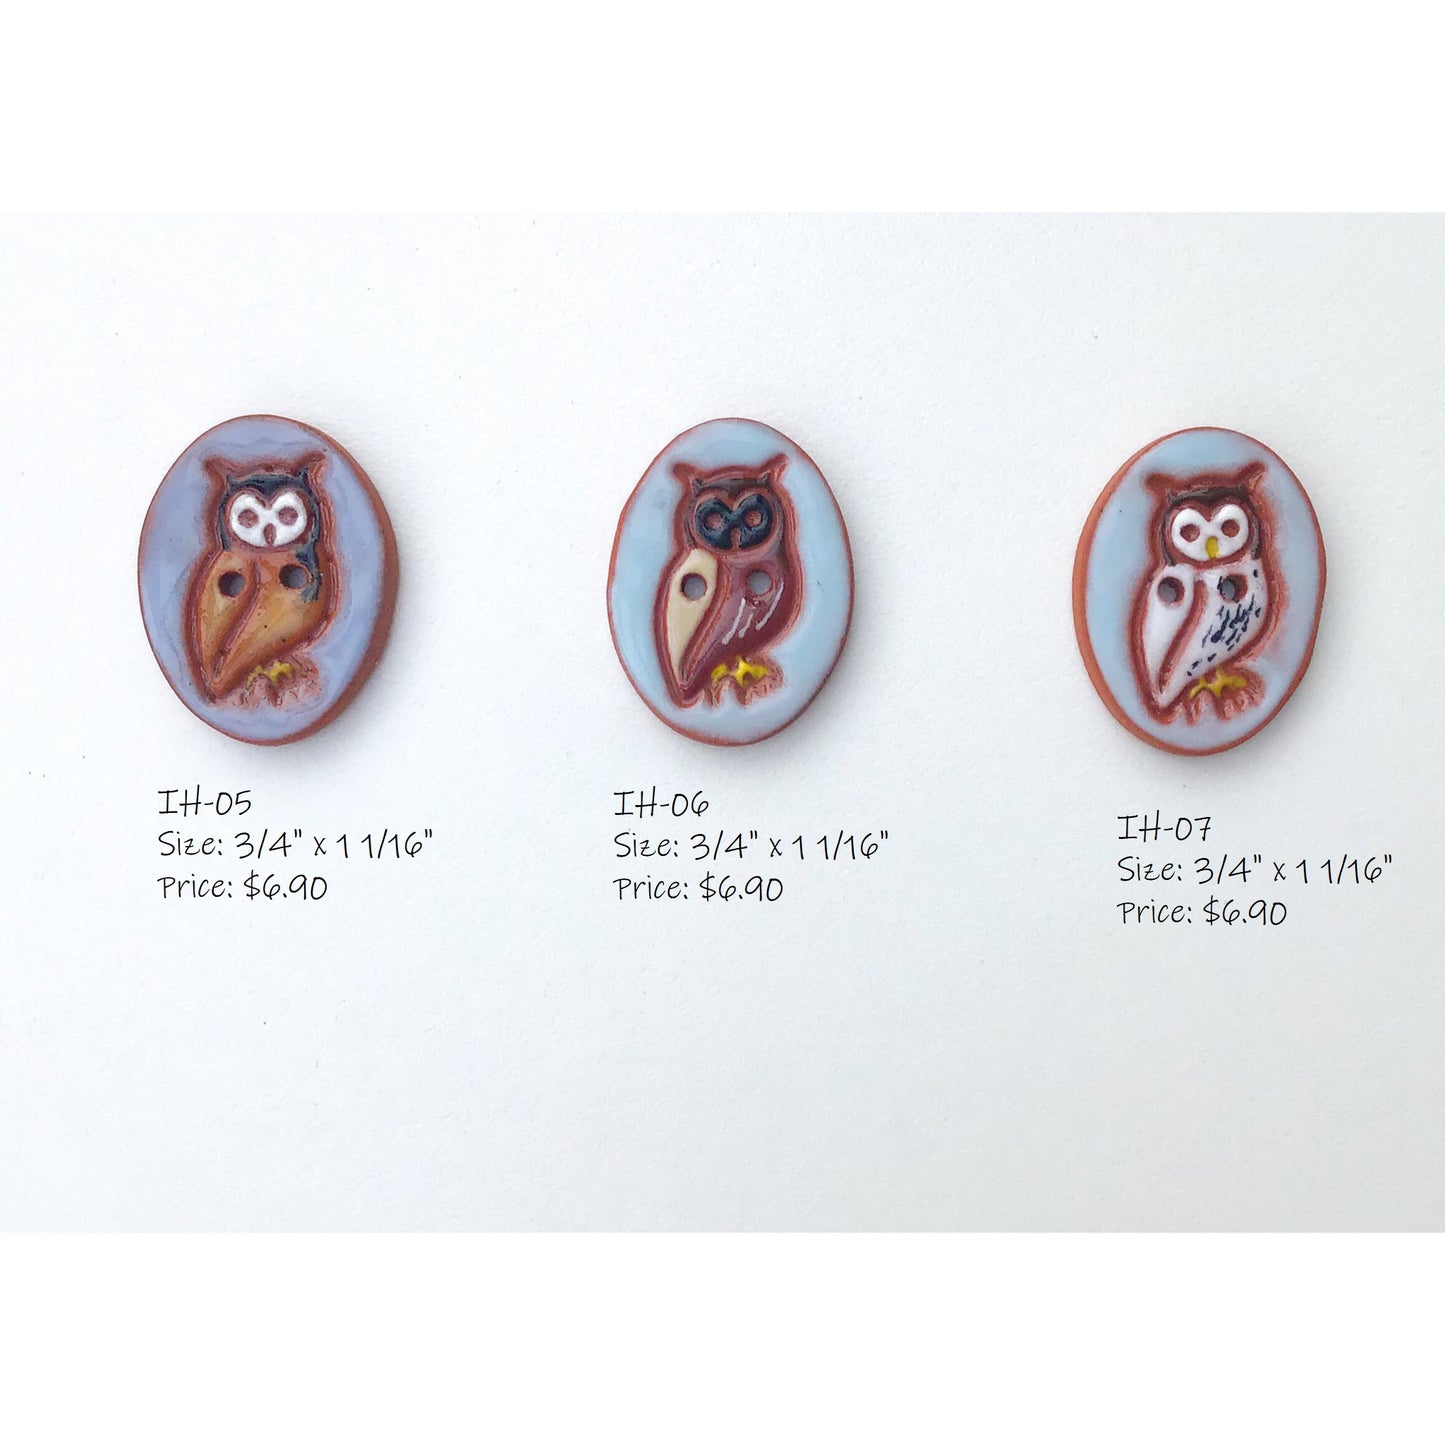 It's a Hoot Button Collection: Hand Stamped & Painted Ceramic Owl Buttons